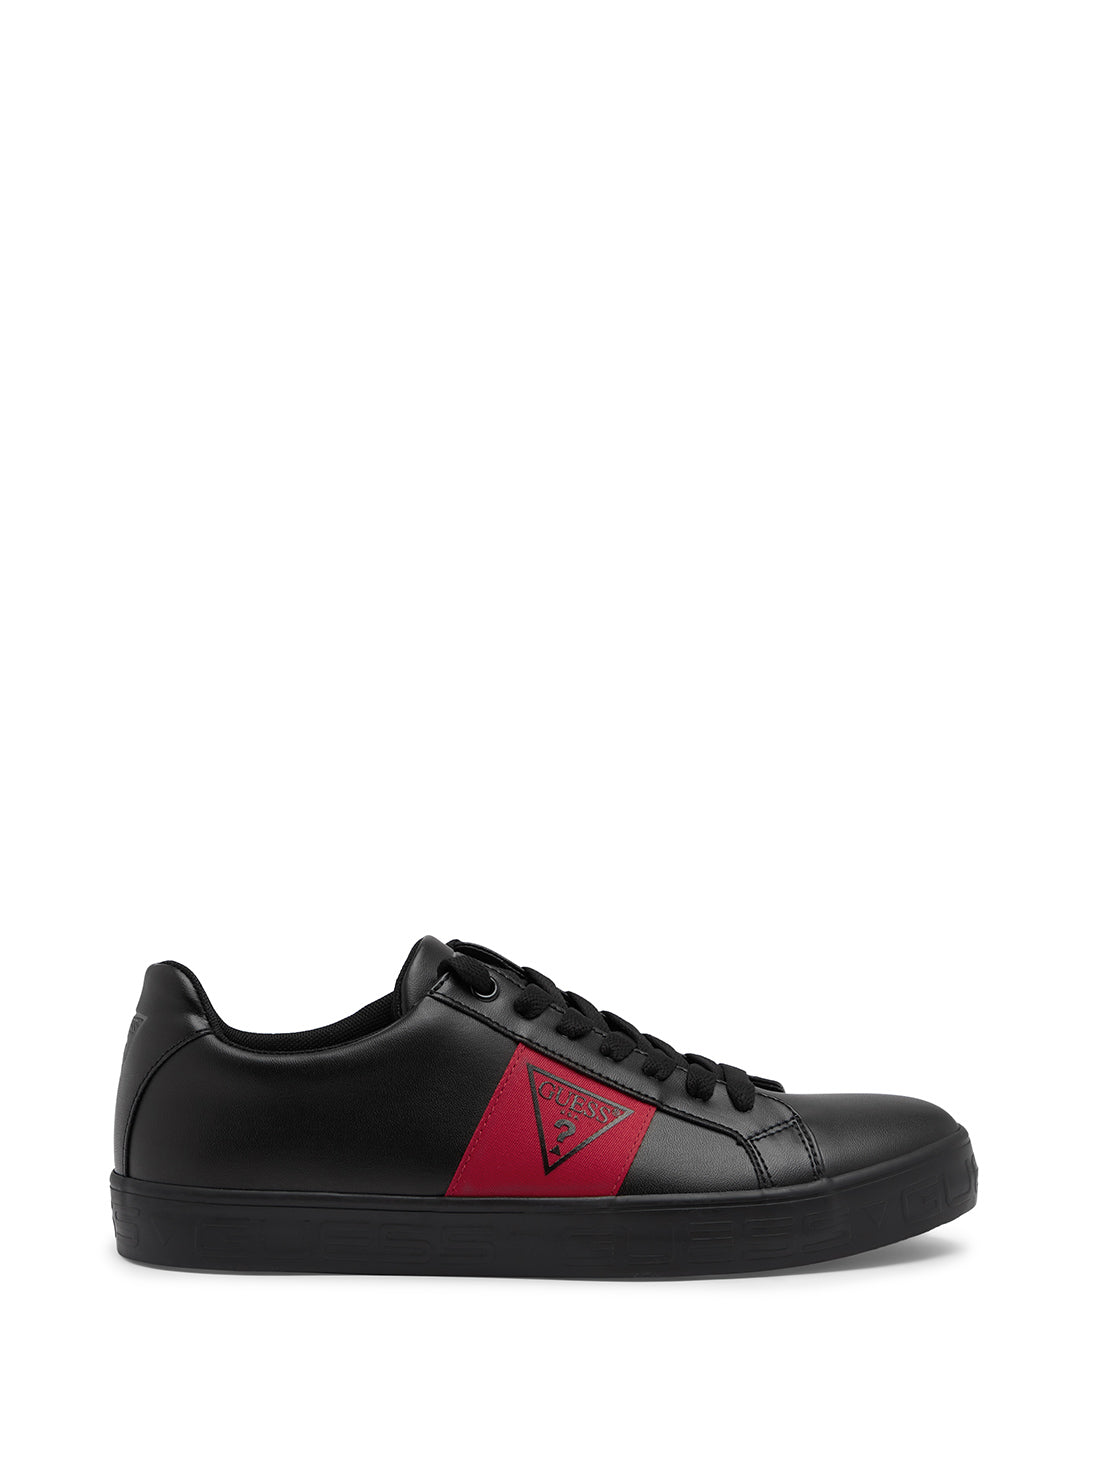 GUESS Men's Black Red Paschal Low Top Sneakers PASCHAL Side View